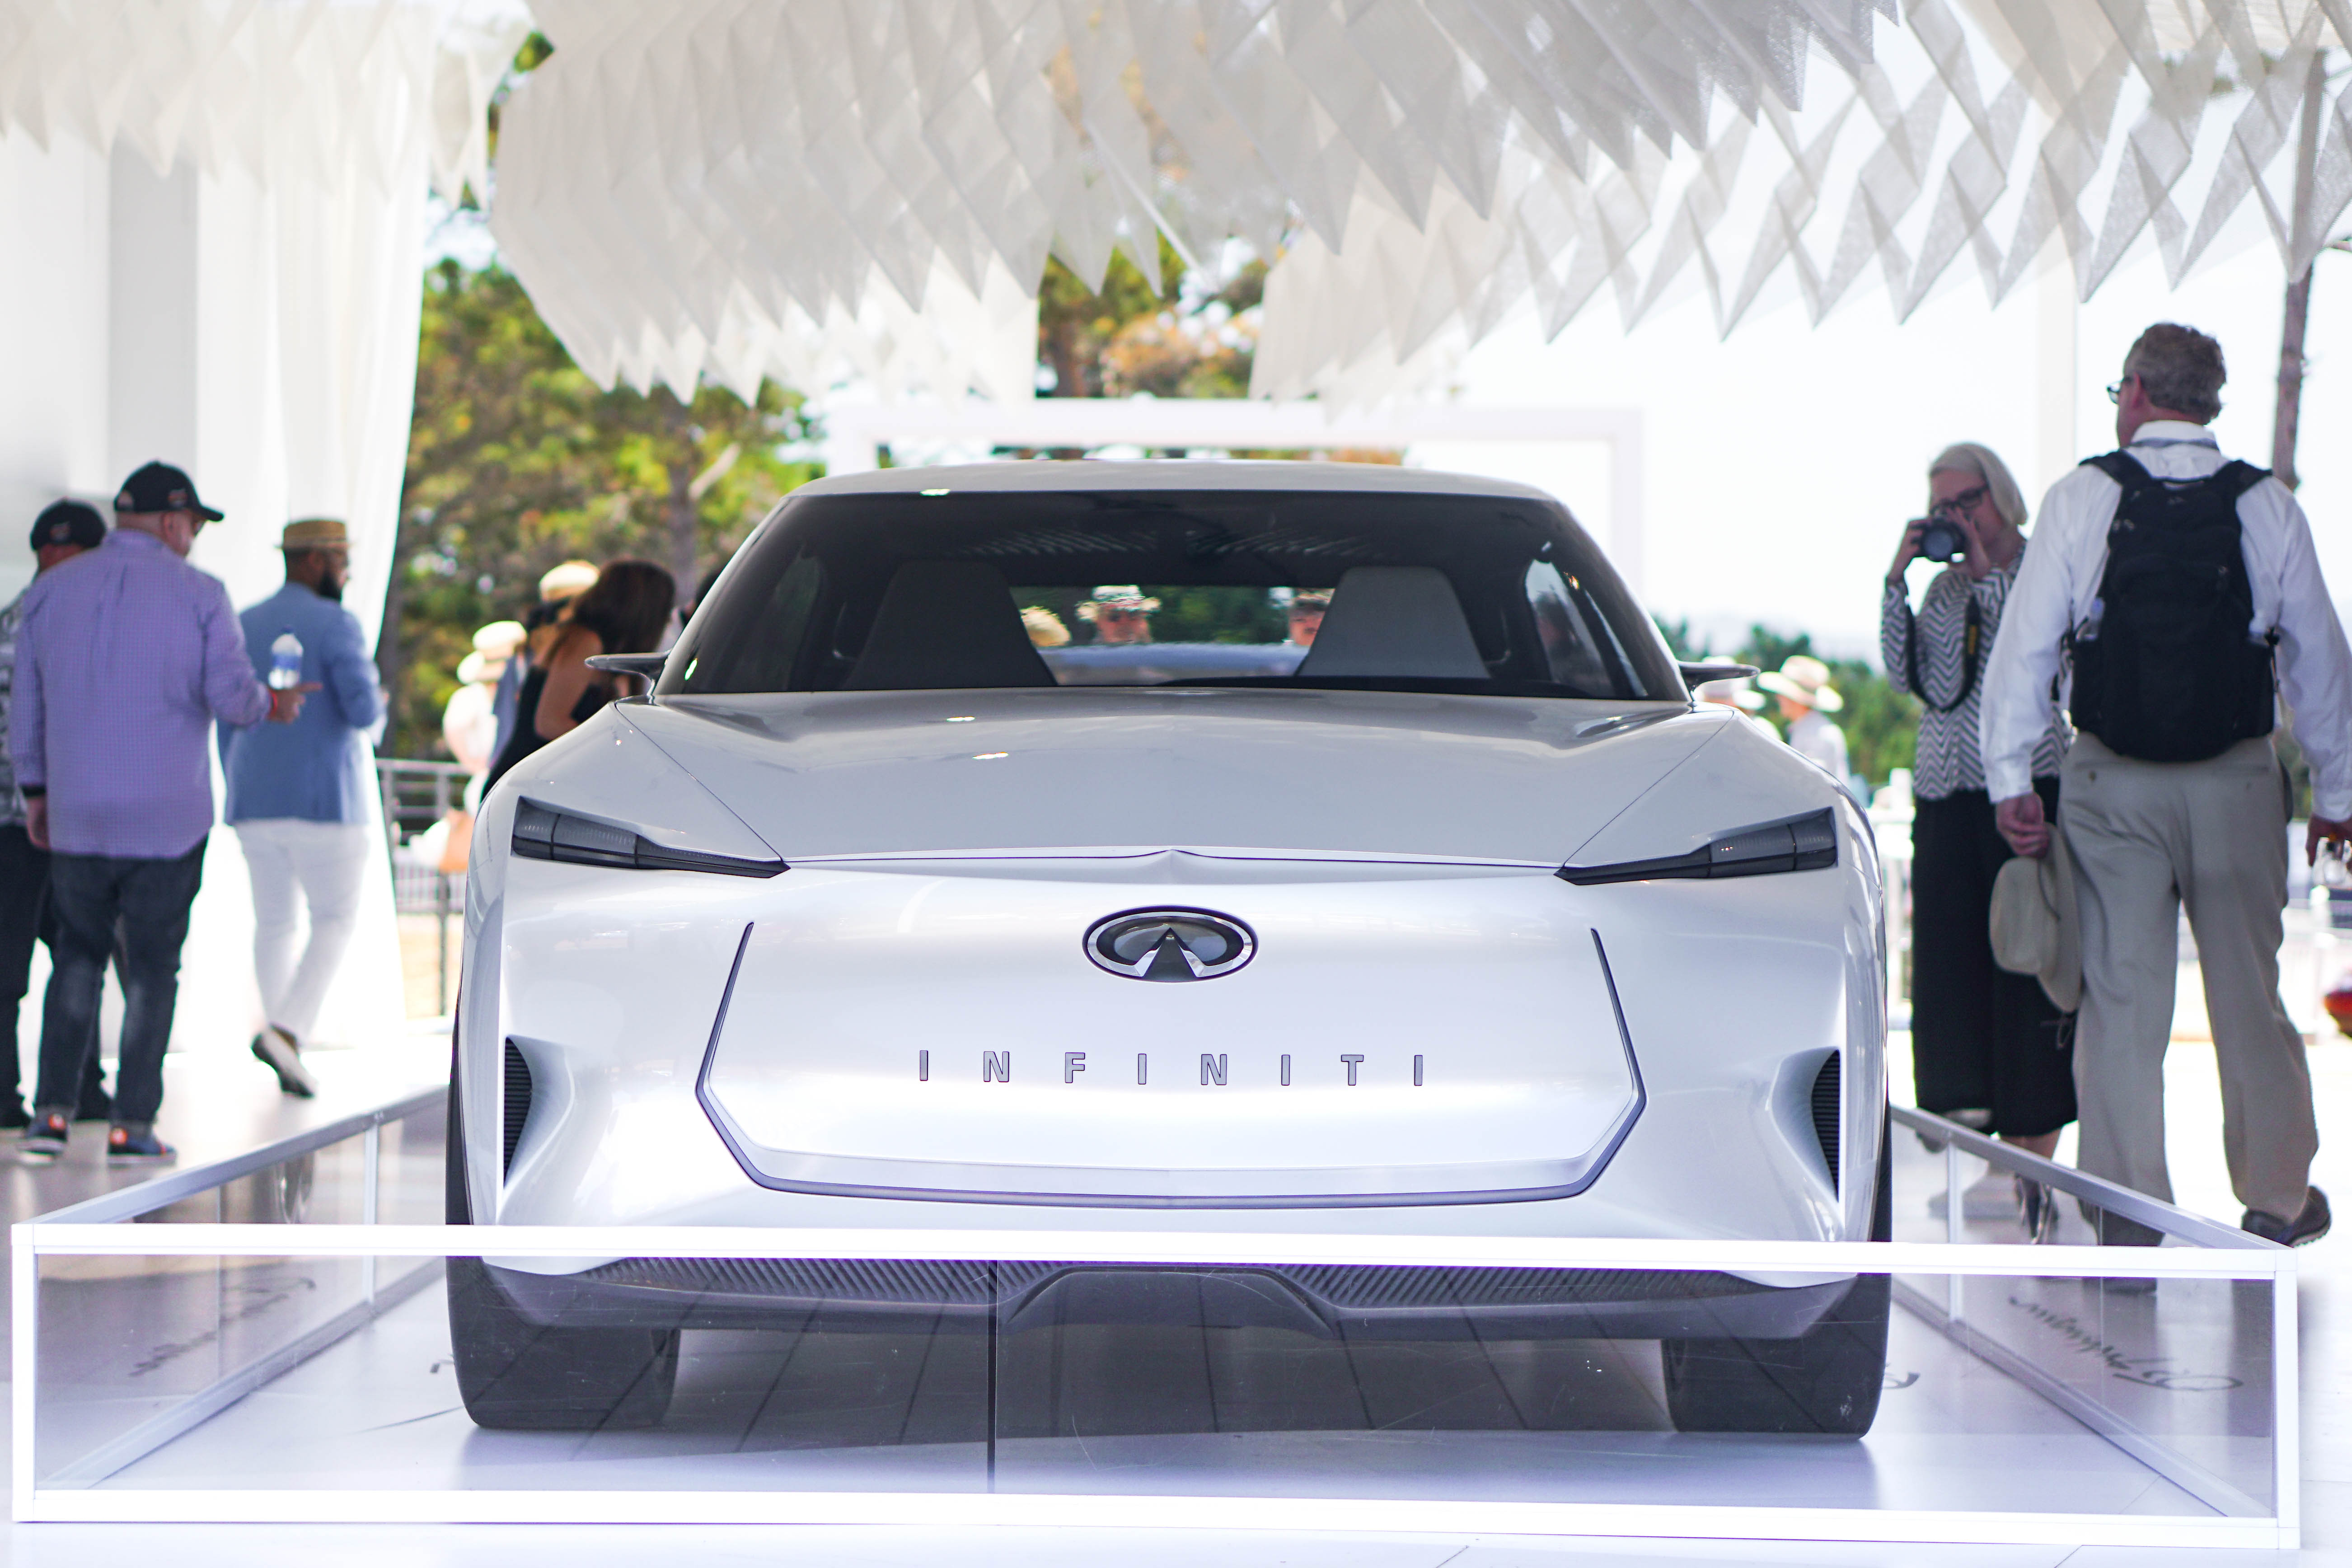 Infinity concept cars displayed at the Japanese Automotive Invitational | Rebecca Nguyen photos